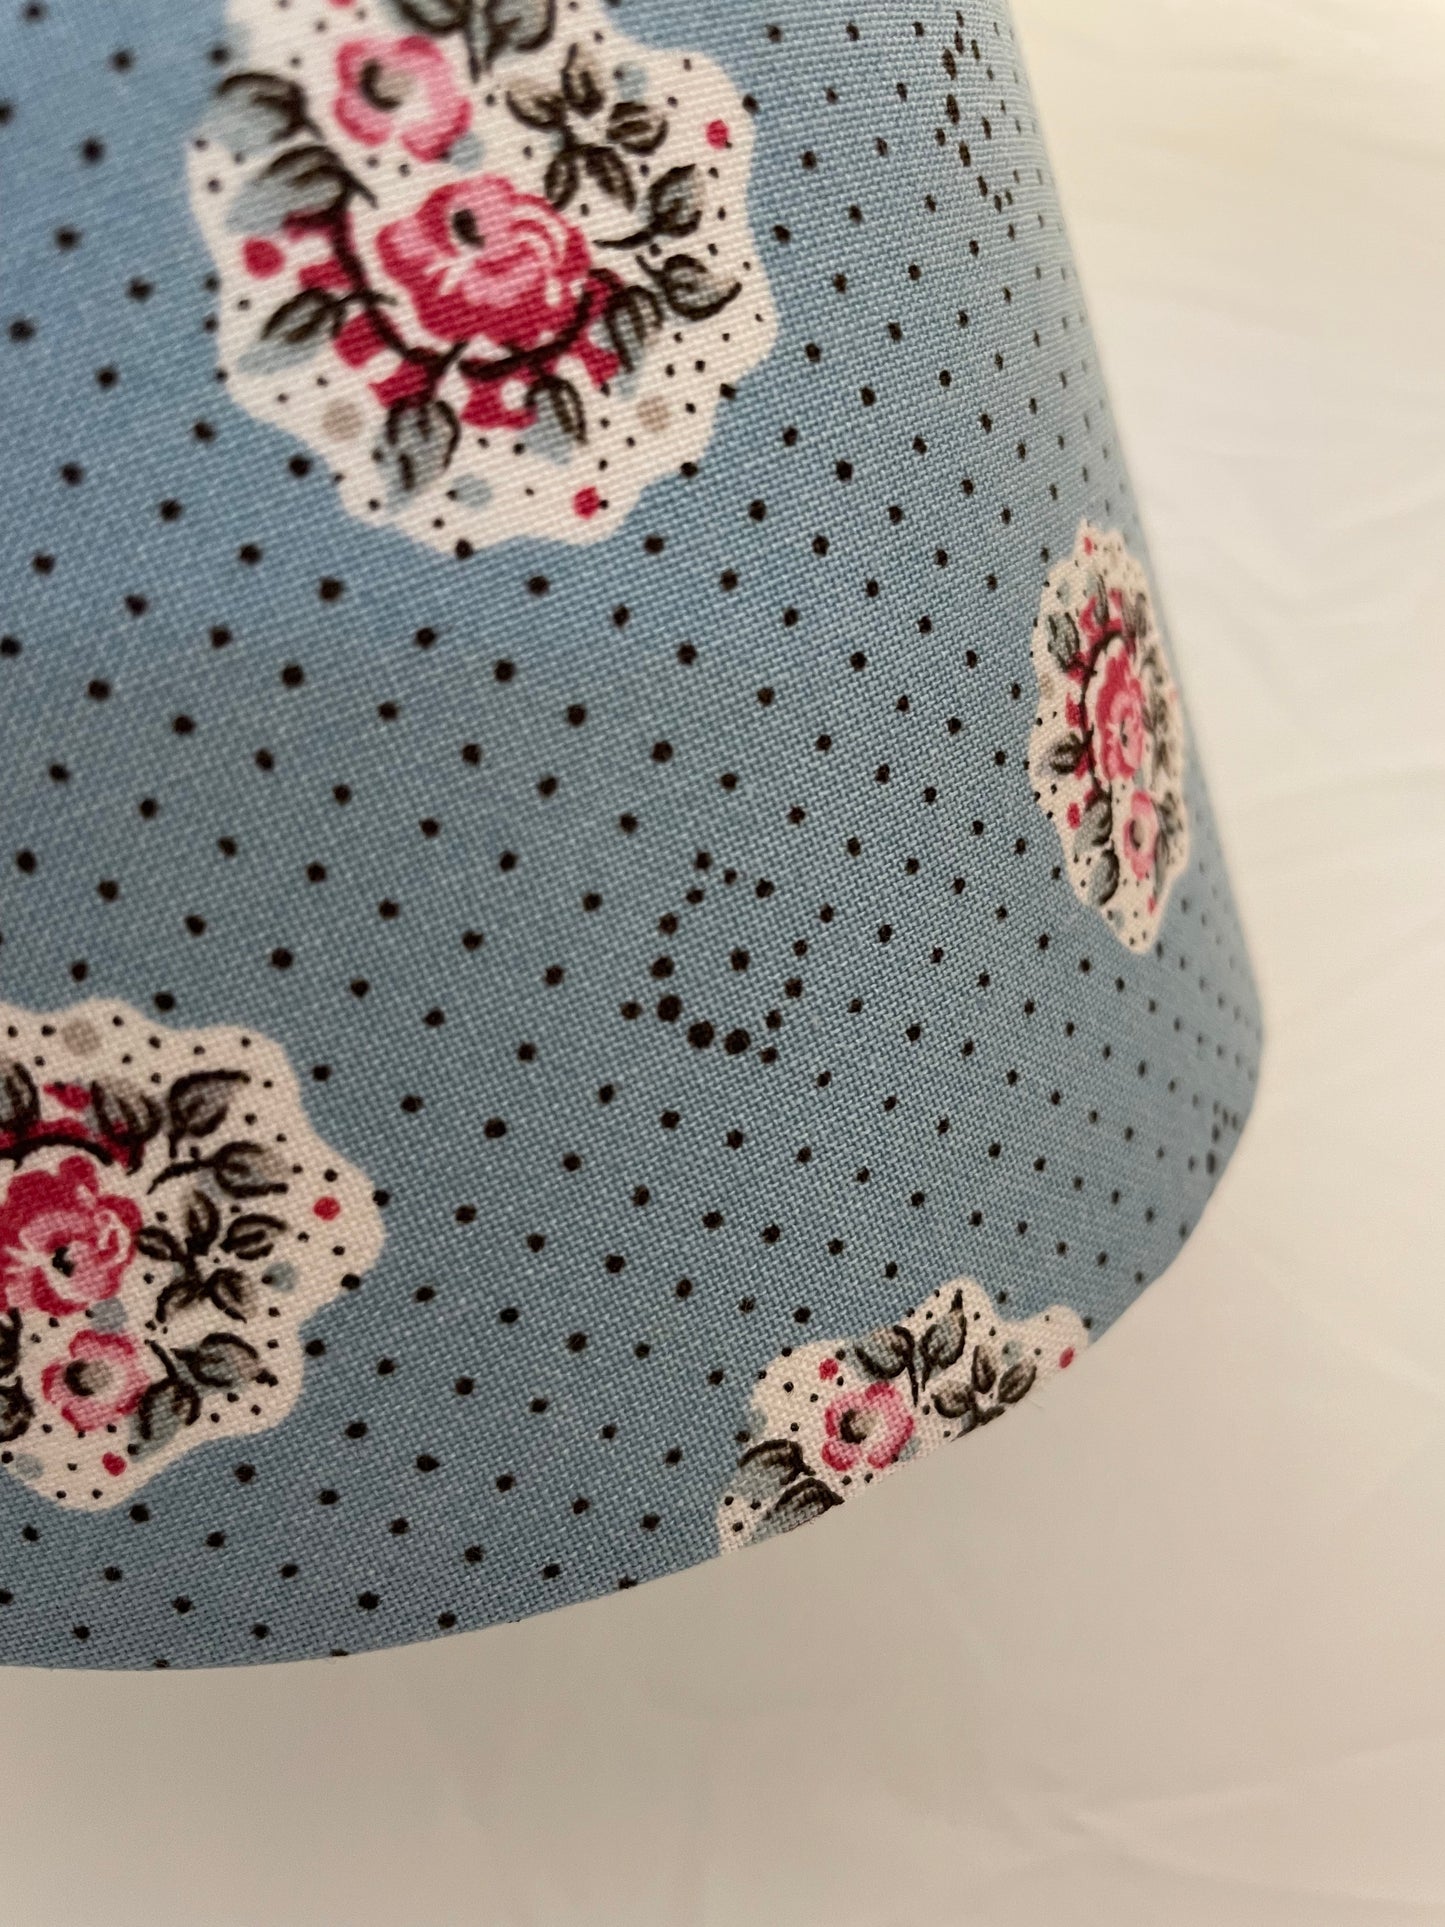 Small Clip-On Lampshade. Les Olivades "Maïanenco". French Blue with Pink Floral Bouquets.